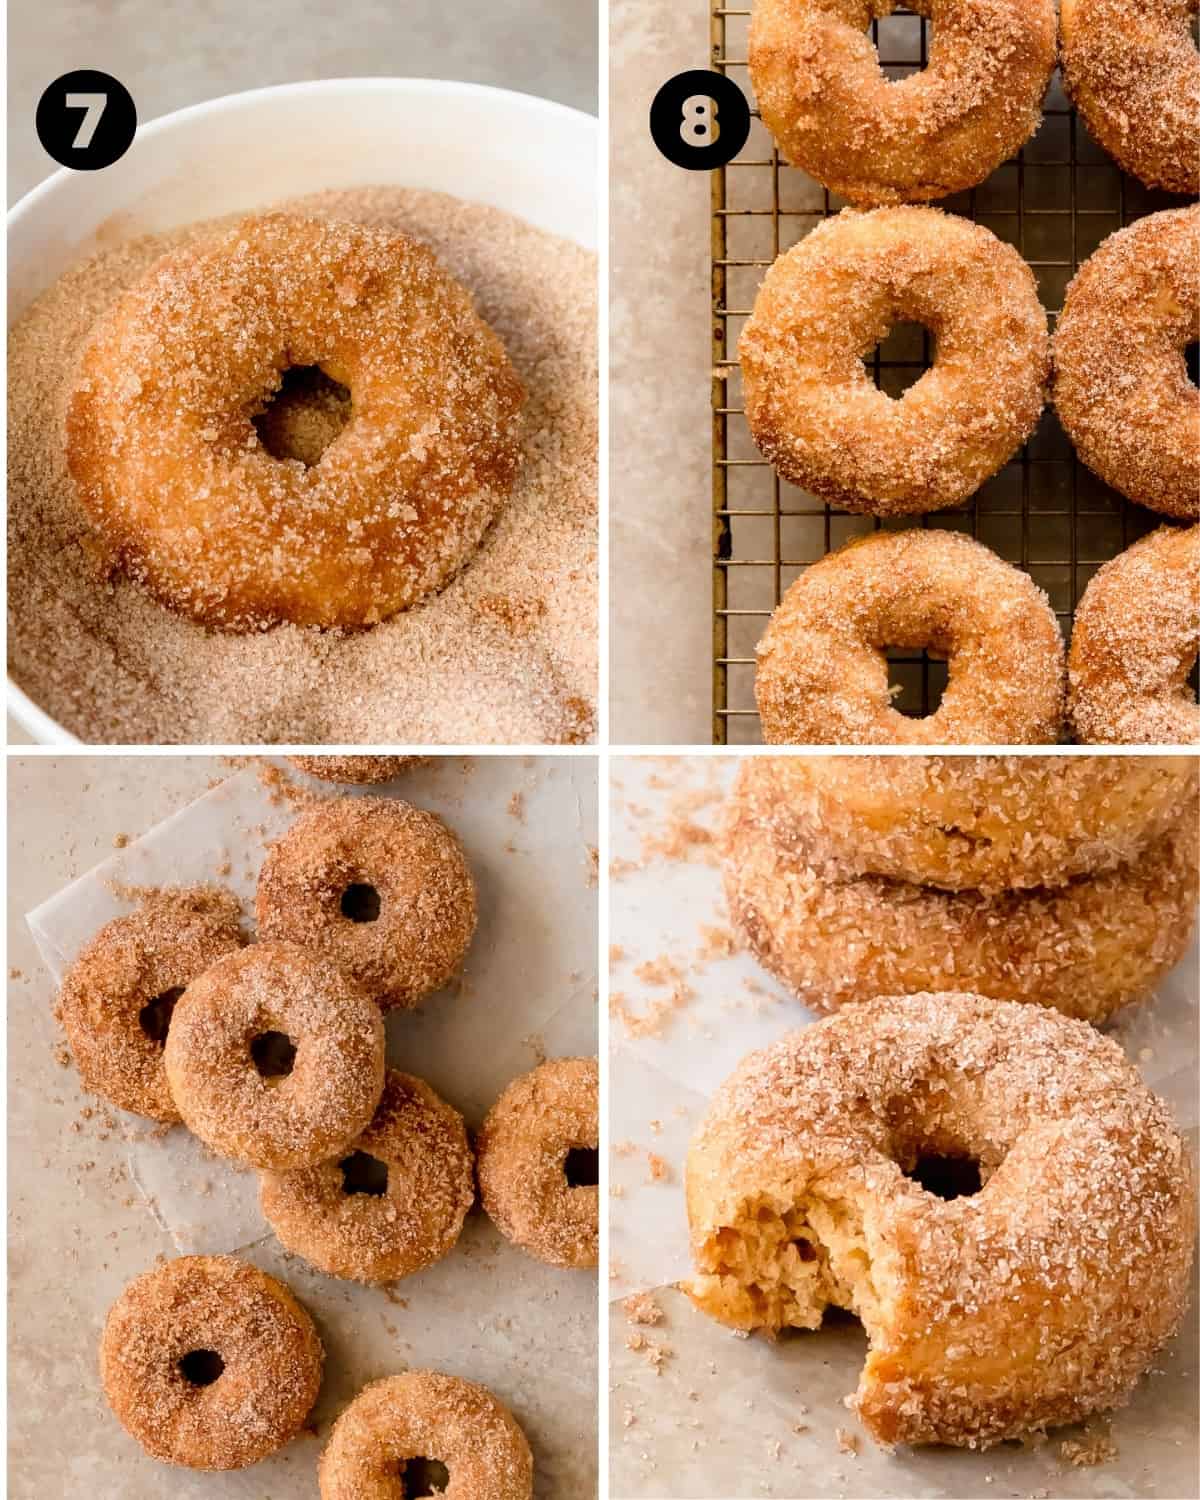 Roll the cinnamon donuts into the cinnamon sugar topping and place on a cooling rack. Repeat with the remaining donuts.